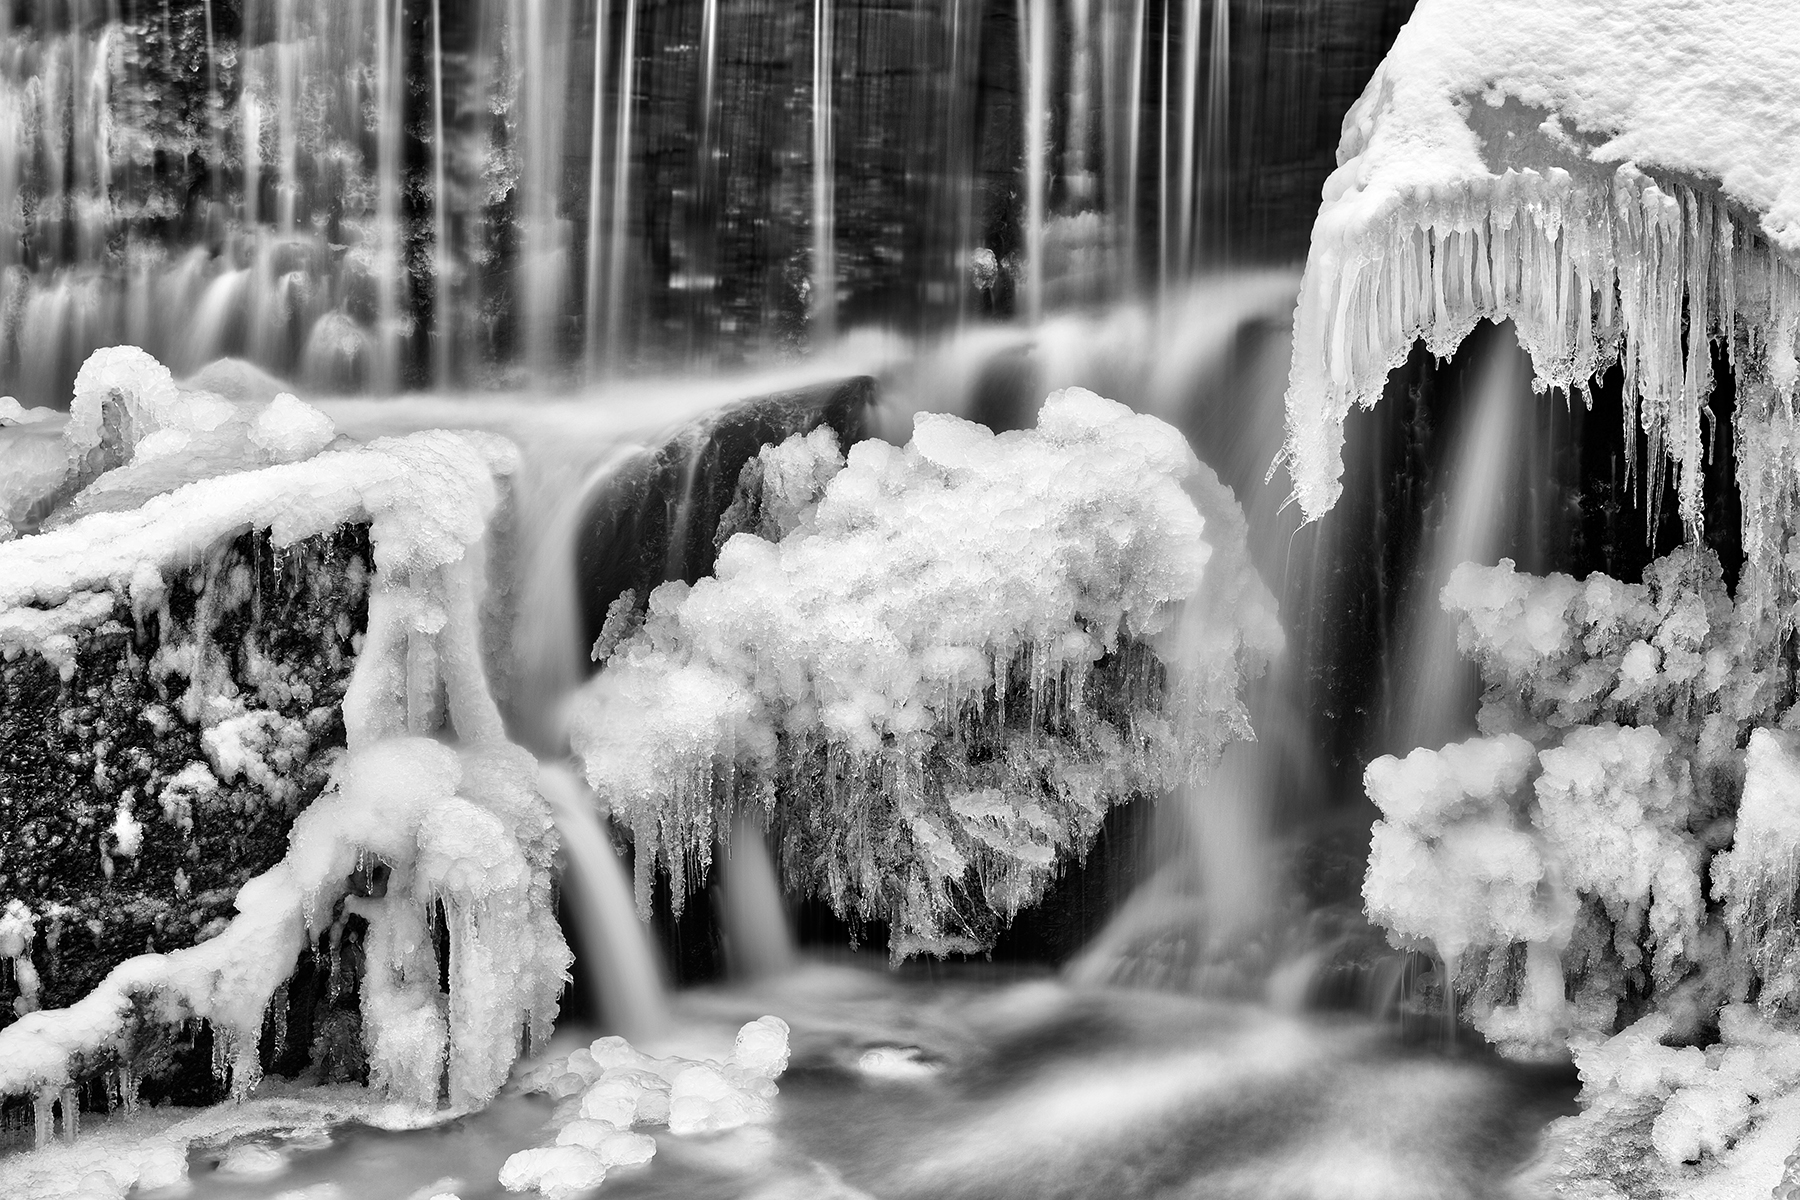 Frozen Phantom Falls - Black and White HDR, America, Perspective, Scenic, Scenery, HQ Photo